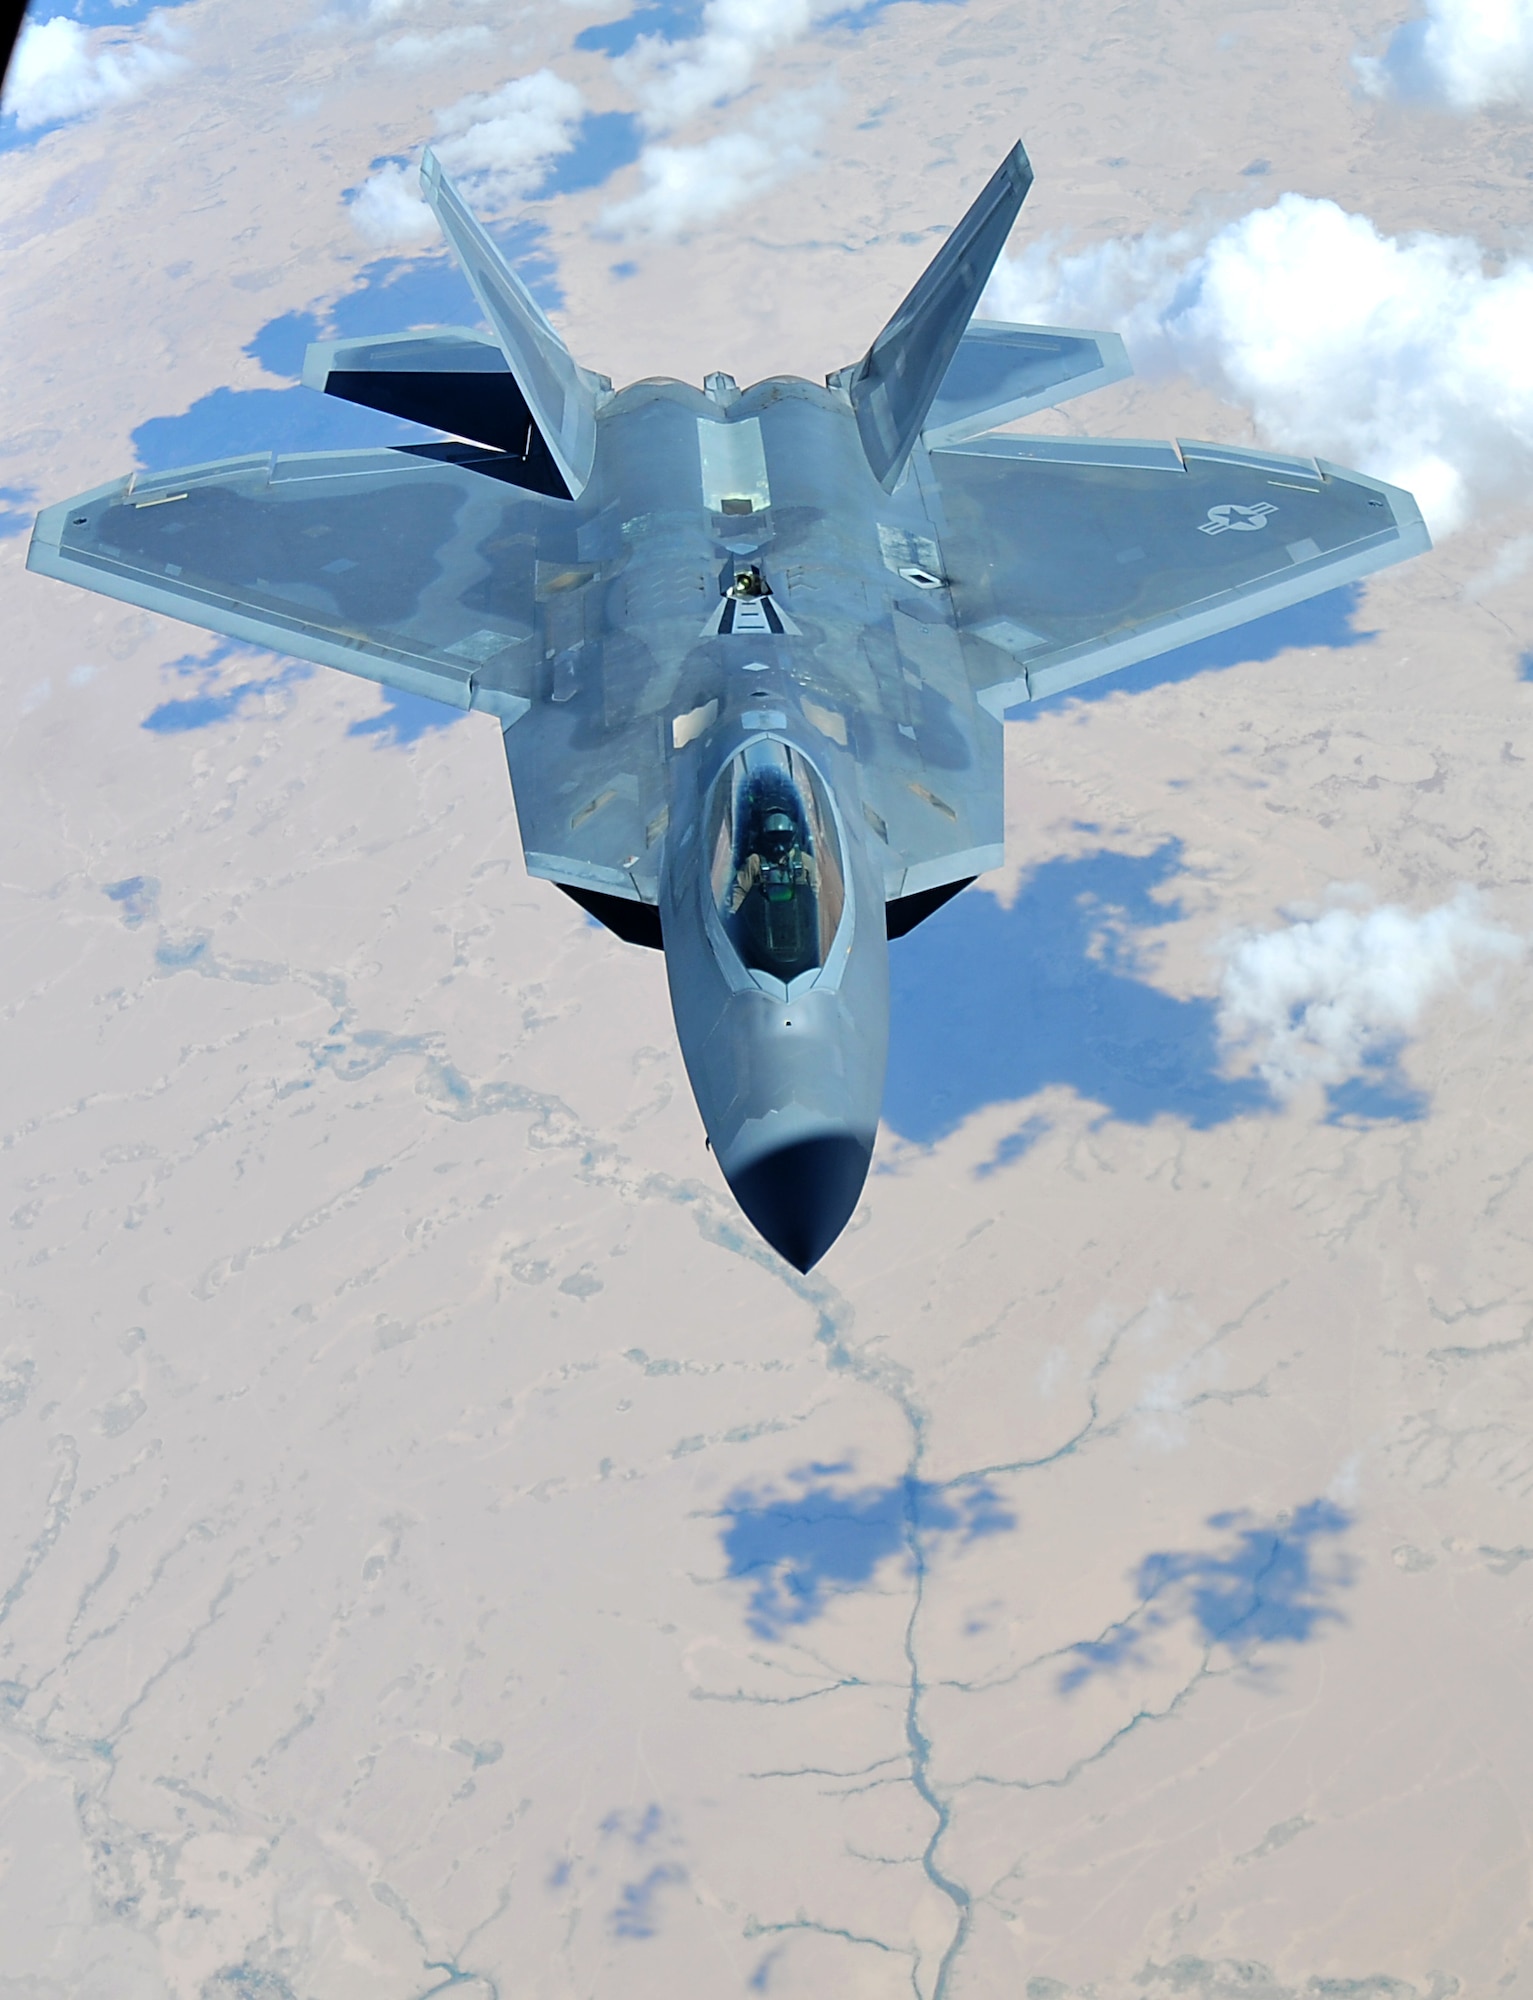 A F-22 Raptor assigned to the 94th Fighter Squadron at the 380th Air Expeditionary Wing, Al Dhafra Air Base, supports Operation Inherent Resolve over the skies of Southwest Asia, May 16, 2018. The Raptor’s mission is to help ensure that the operations of U.S. and coalition forces on the ground and in the air are unimpeded by adversary aircraft.